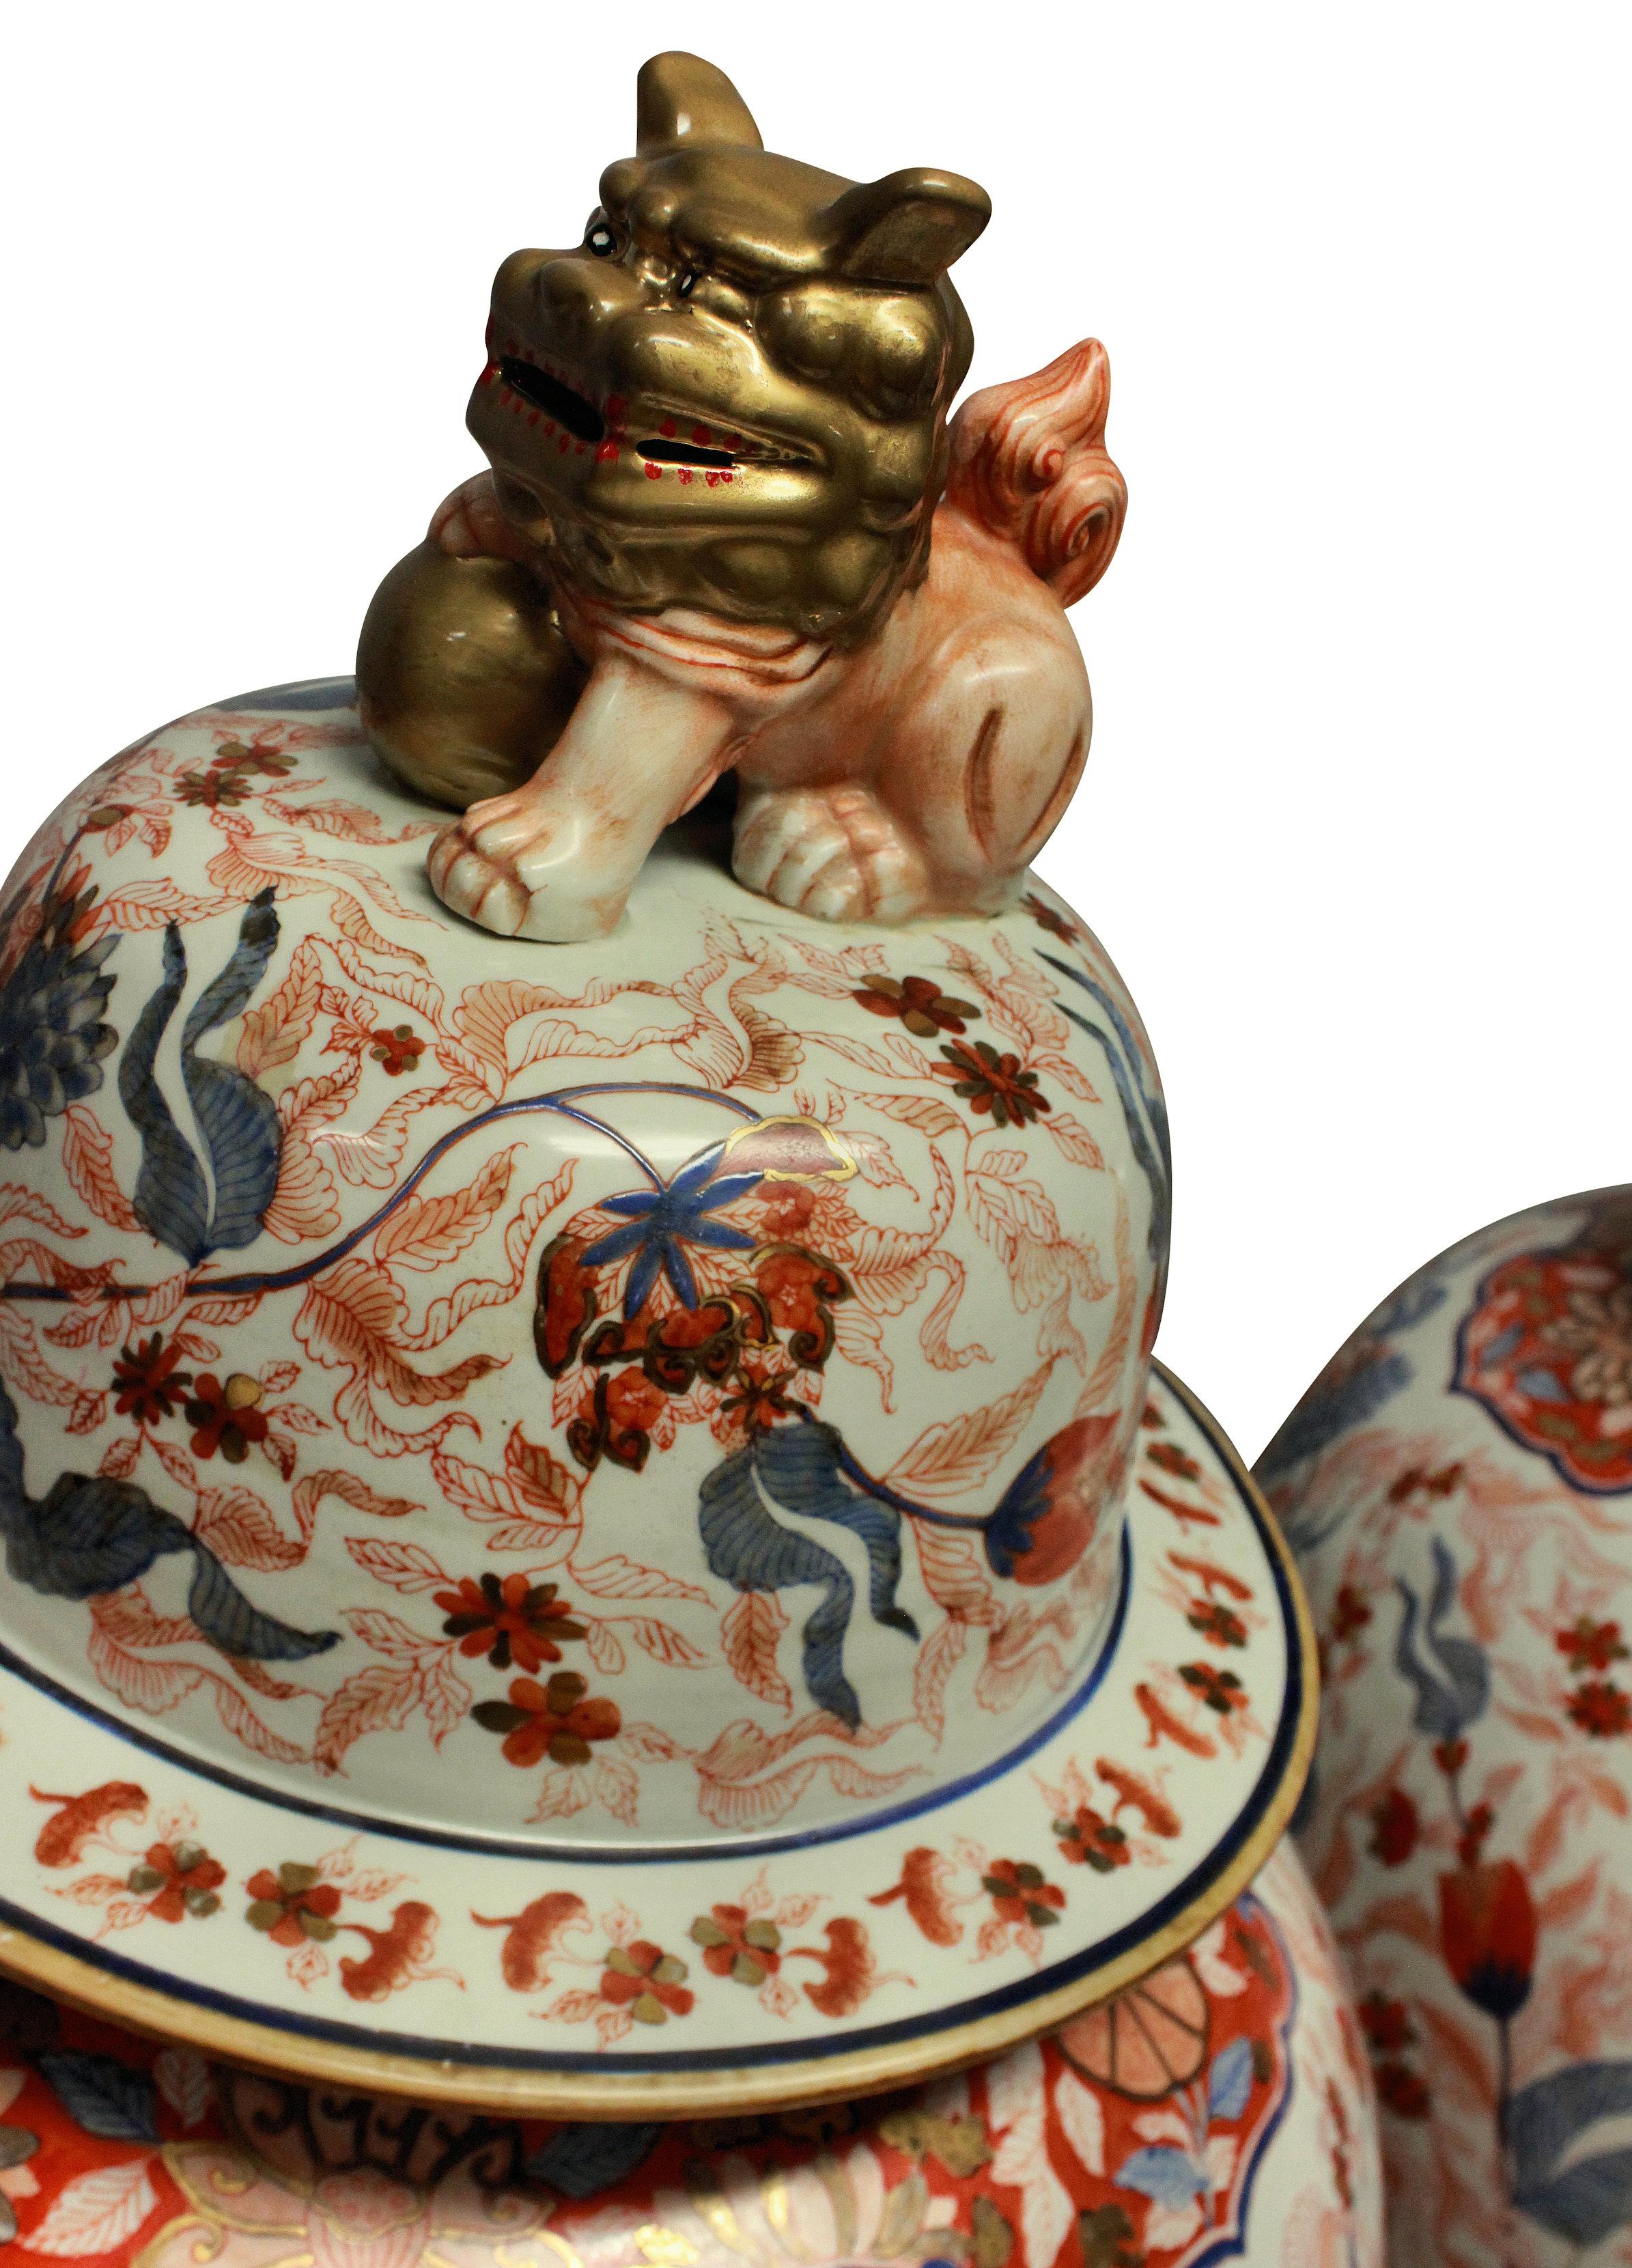 A large and impressive pair of Japanese Imari floor vases with covers. Decorated by hand in the traditional palette of cobalt blue with iron red and ground gold. The covers have dogs of foo finials. The vases are unusual in their scale. They are